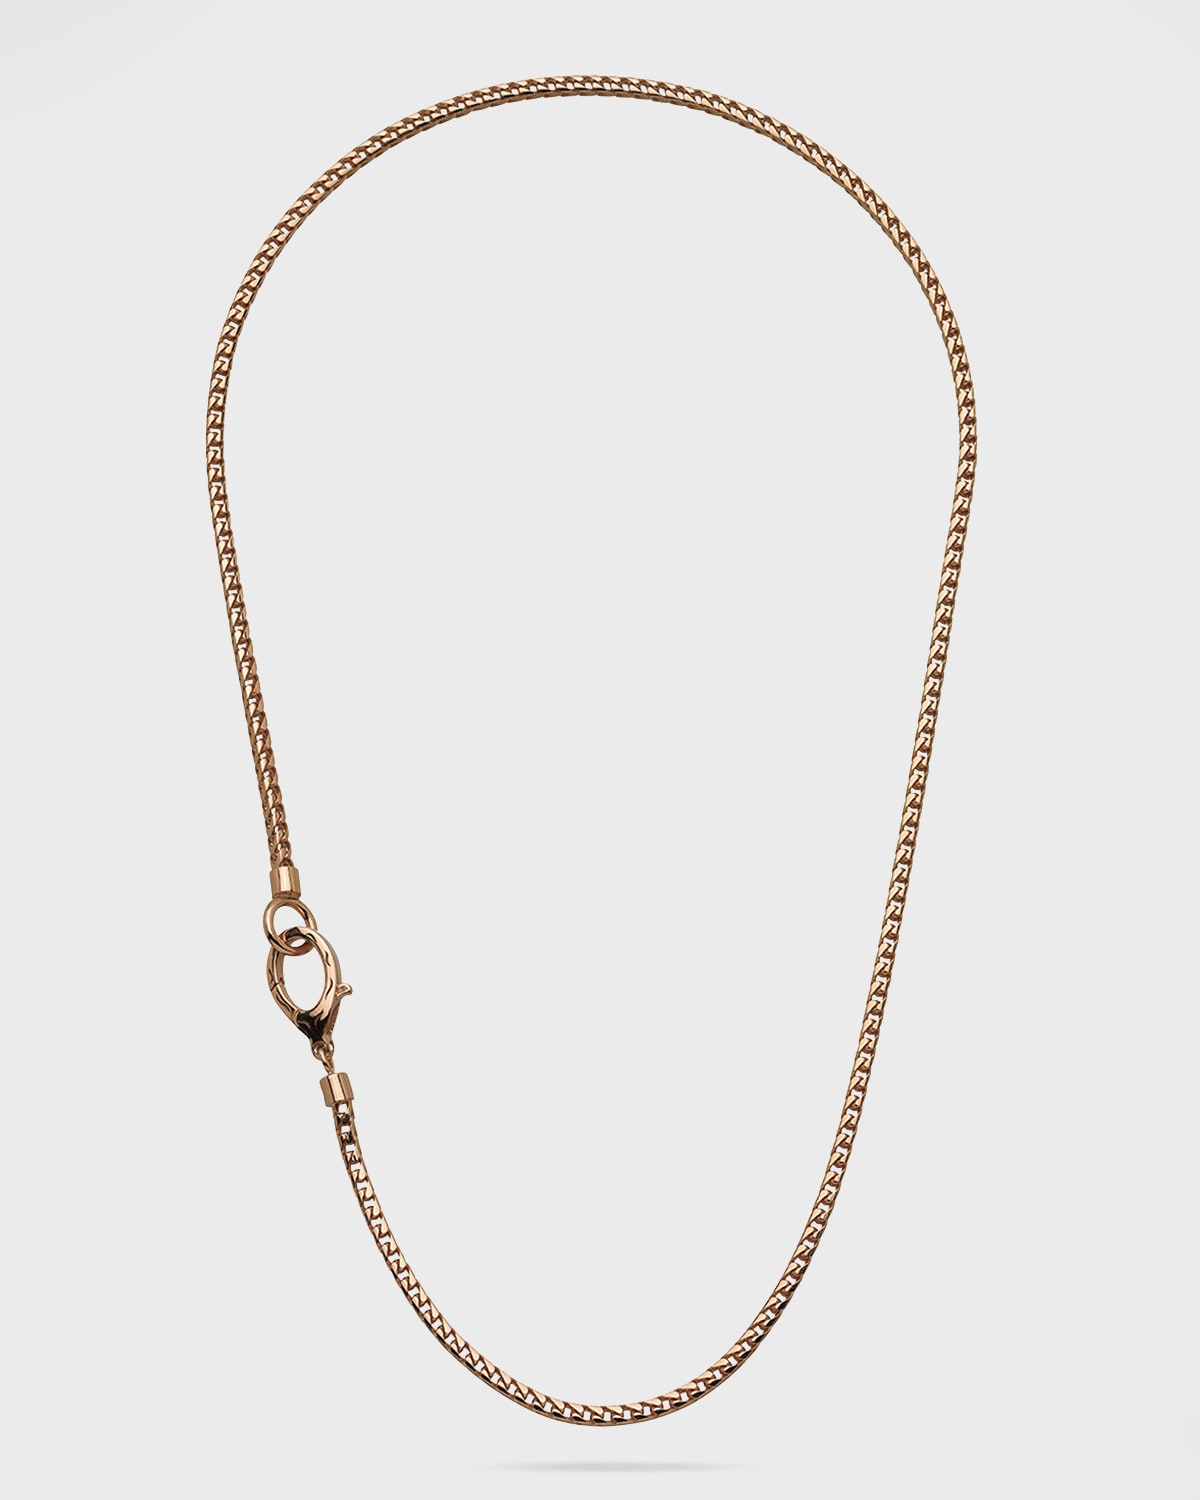 Marco Dal Maso Mesh Rose Gold Plated Silver Necklace, 20"l